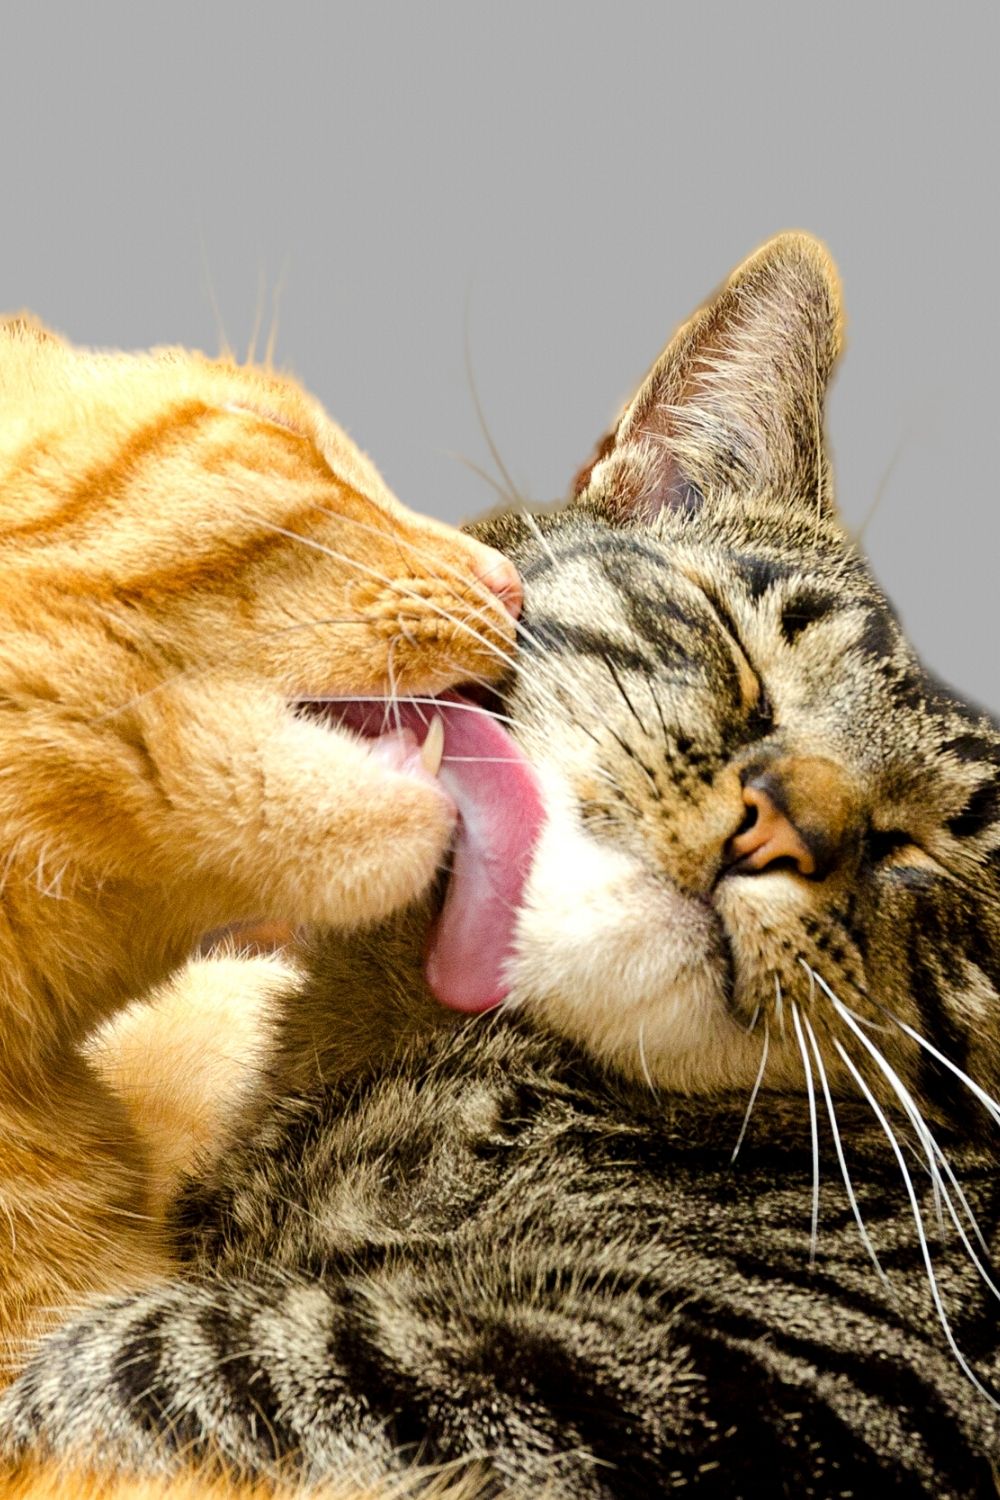 Cats licking each other is another form of aggression